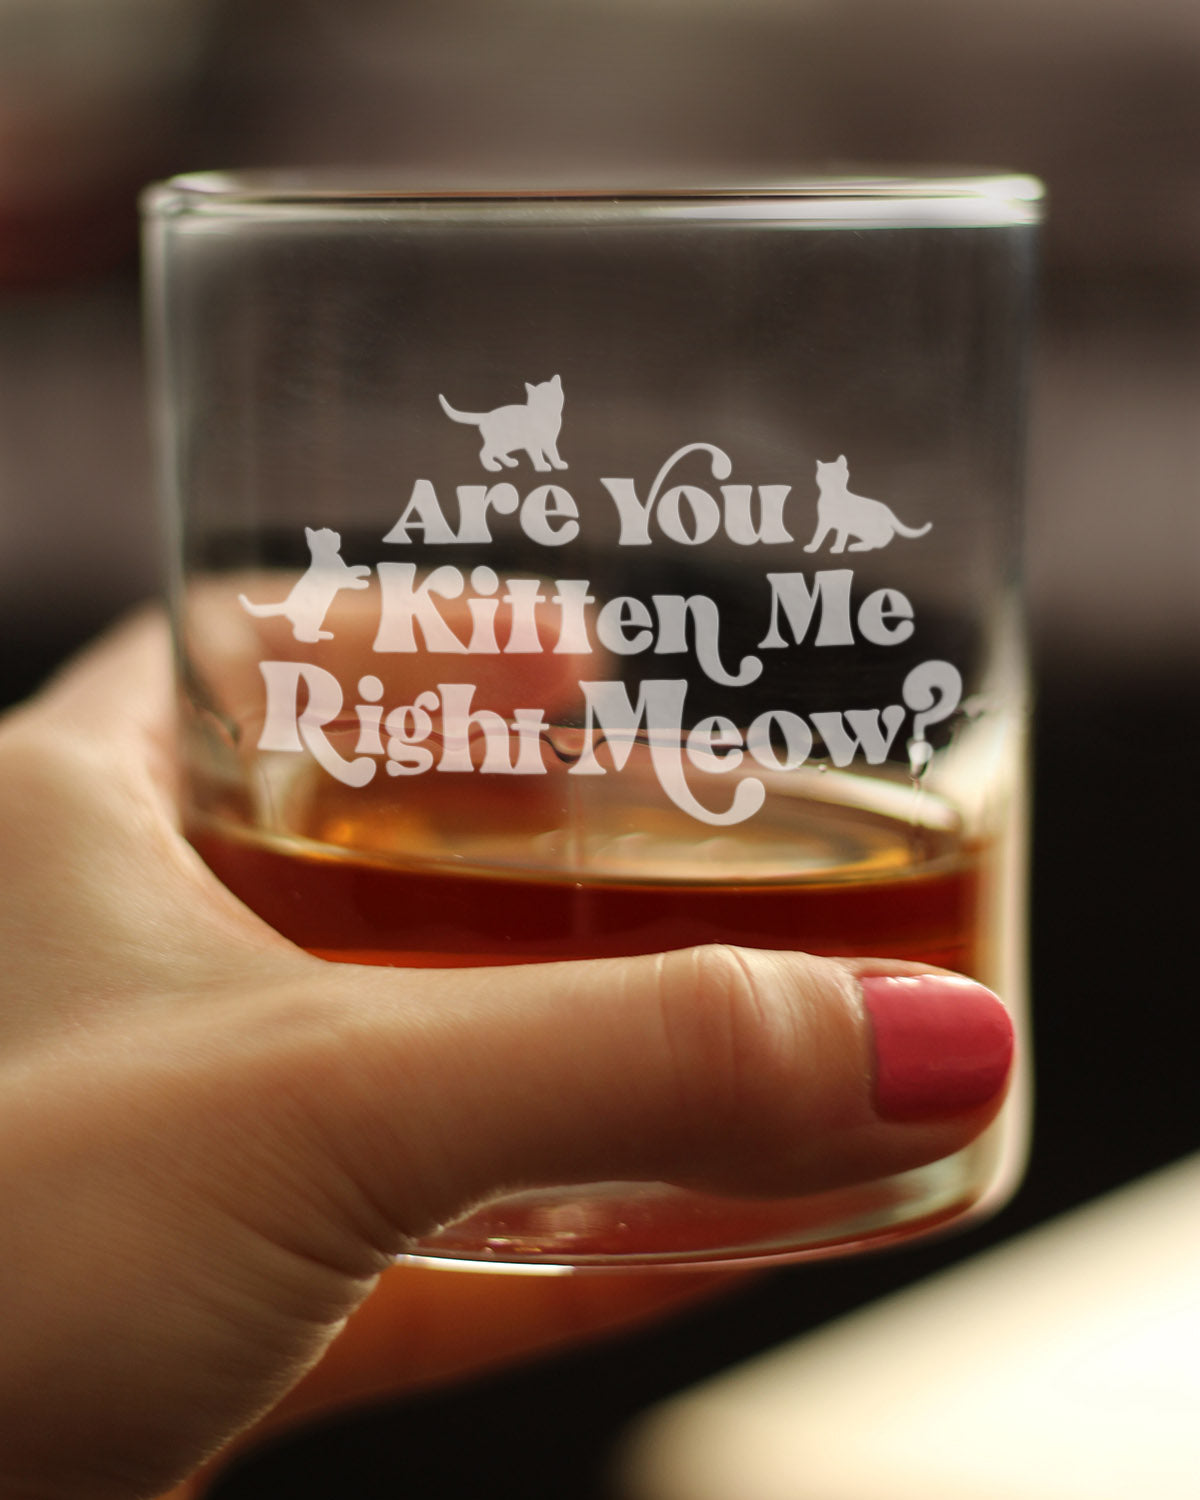 Are You Kitten Me Right Meow - 10 Ounce Rocks Glass